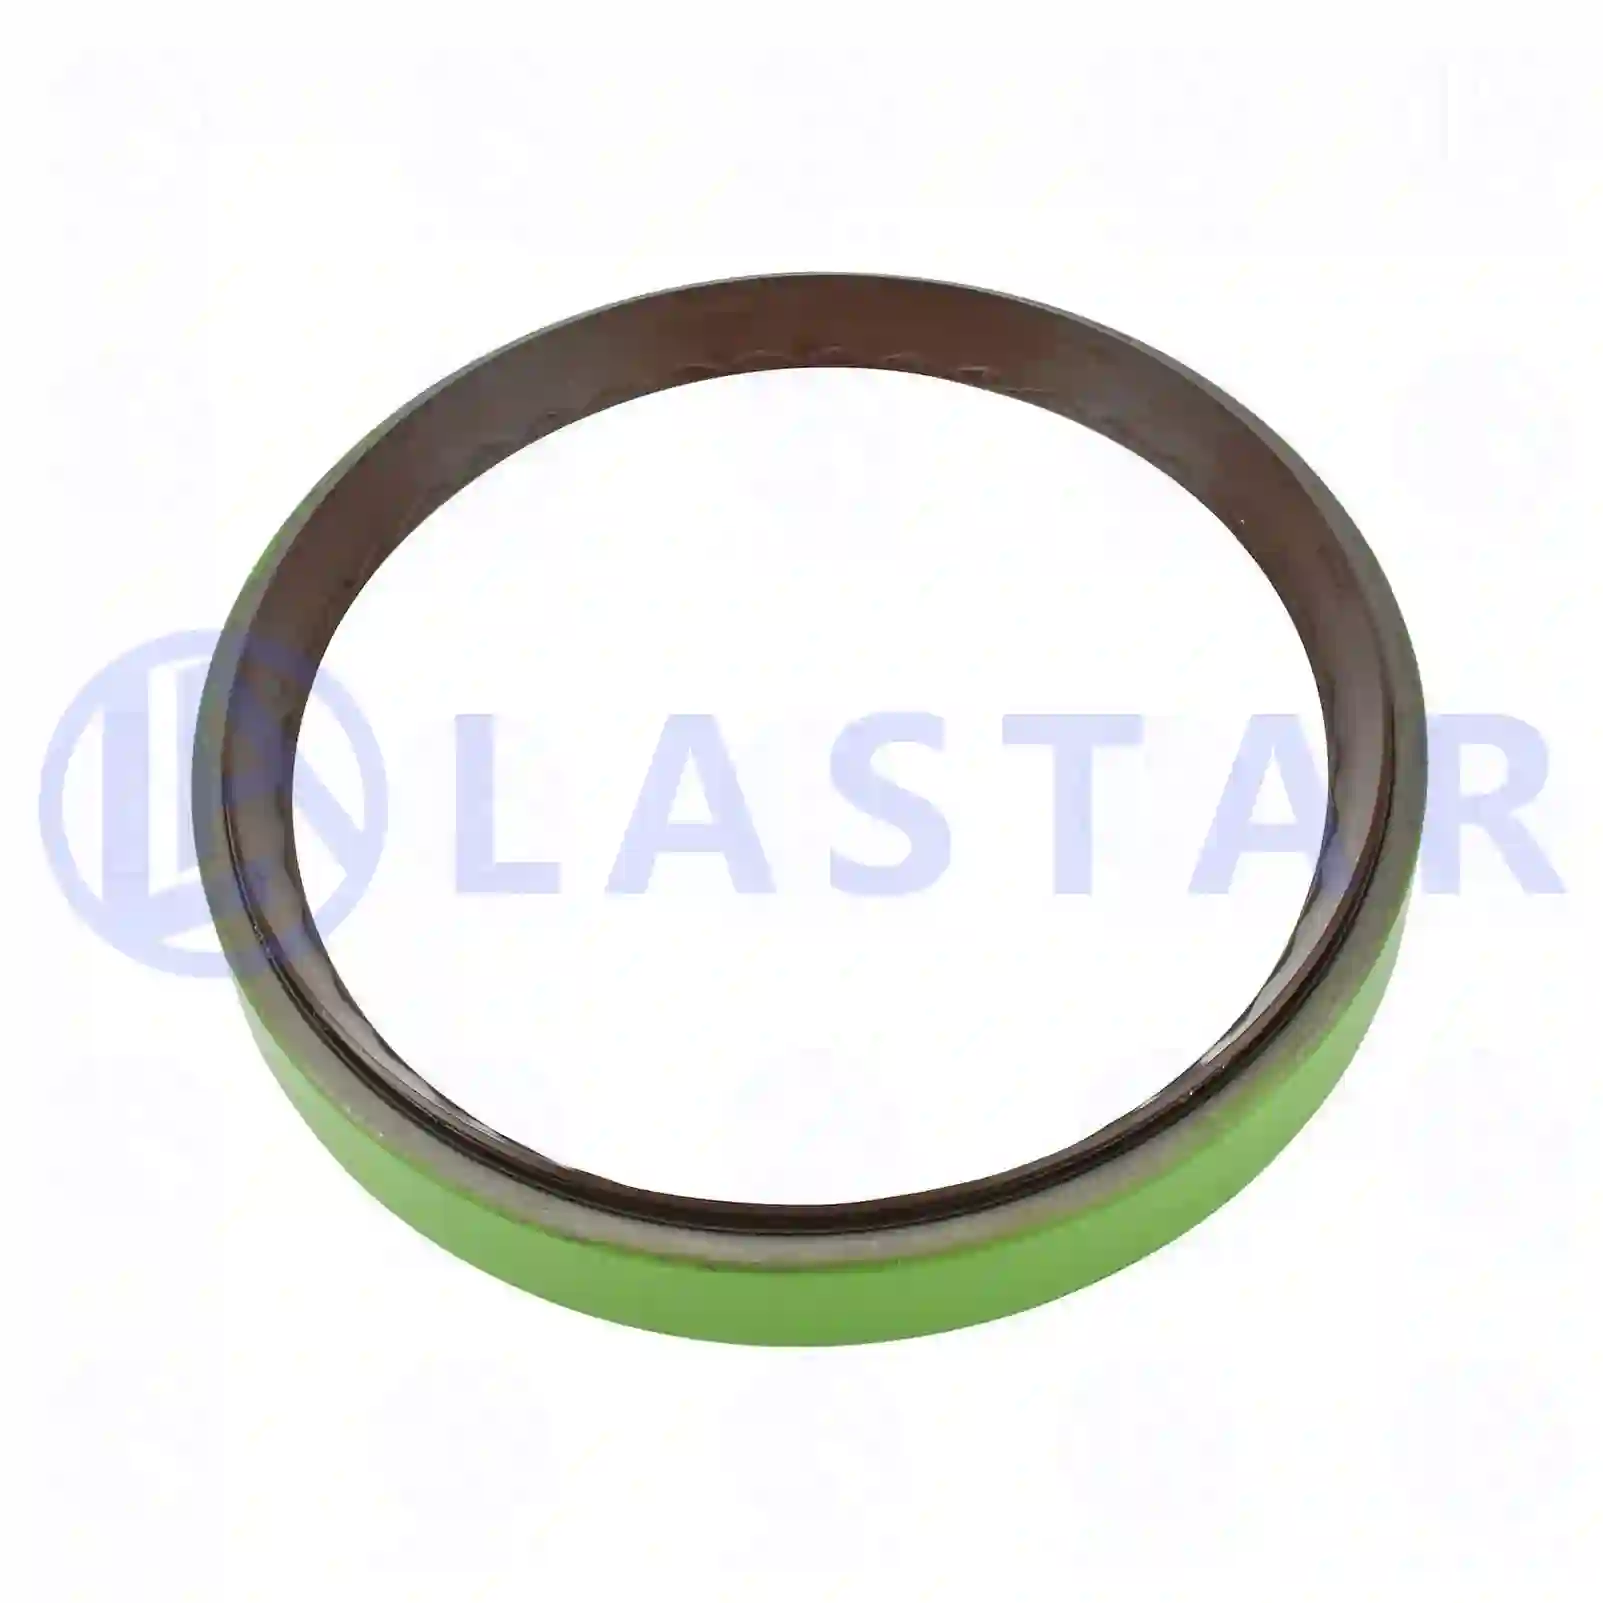 Oil seal, 77726104, 278524, 291463, 370075, 598925, , ||  77726104 Lastar Spare Part | Truck Spare Parts, Auotomotive Spare Parts Oil seal, 77726104, 278524, 291463, 370075, 598925, , ||  77726104 Lastar Spare Part | Truck Spare Parts, Auotomotive Spare Parts